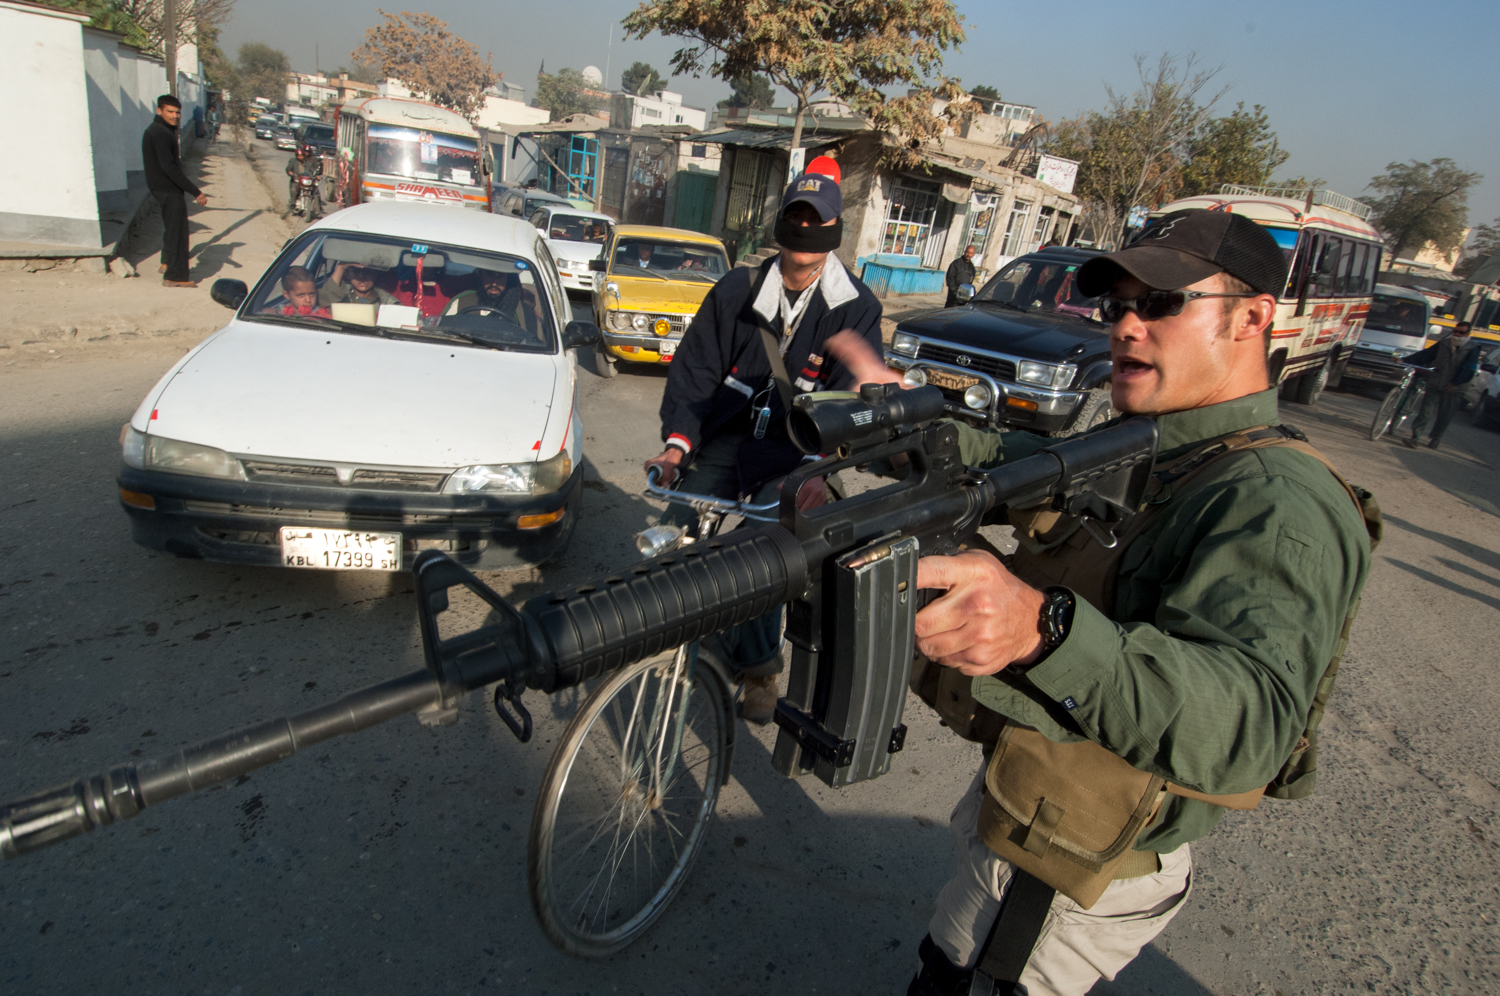  Private security contractor, Neil Gary, 26, a former U.S. Marine, points his weapon while providing security for a convoy in Kabul, Afghanistan. 